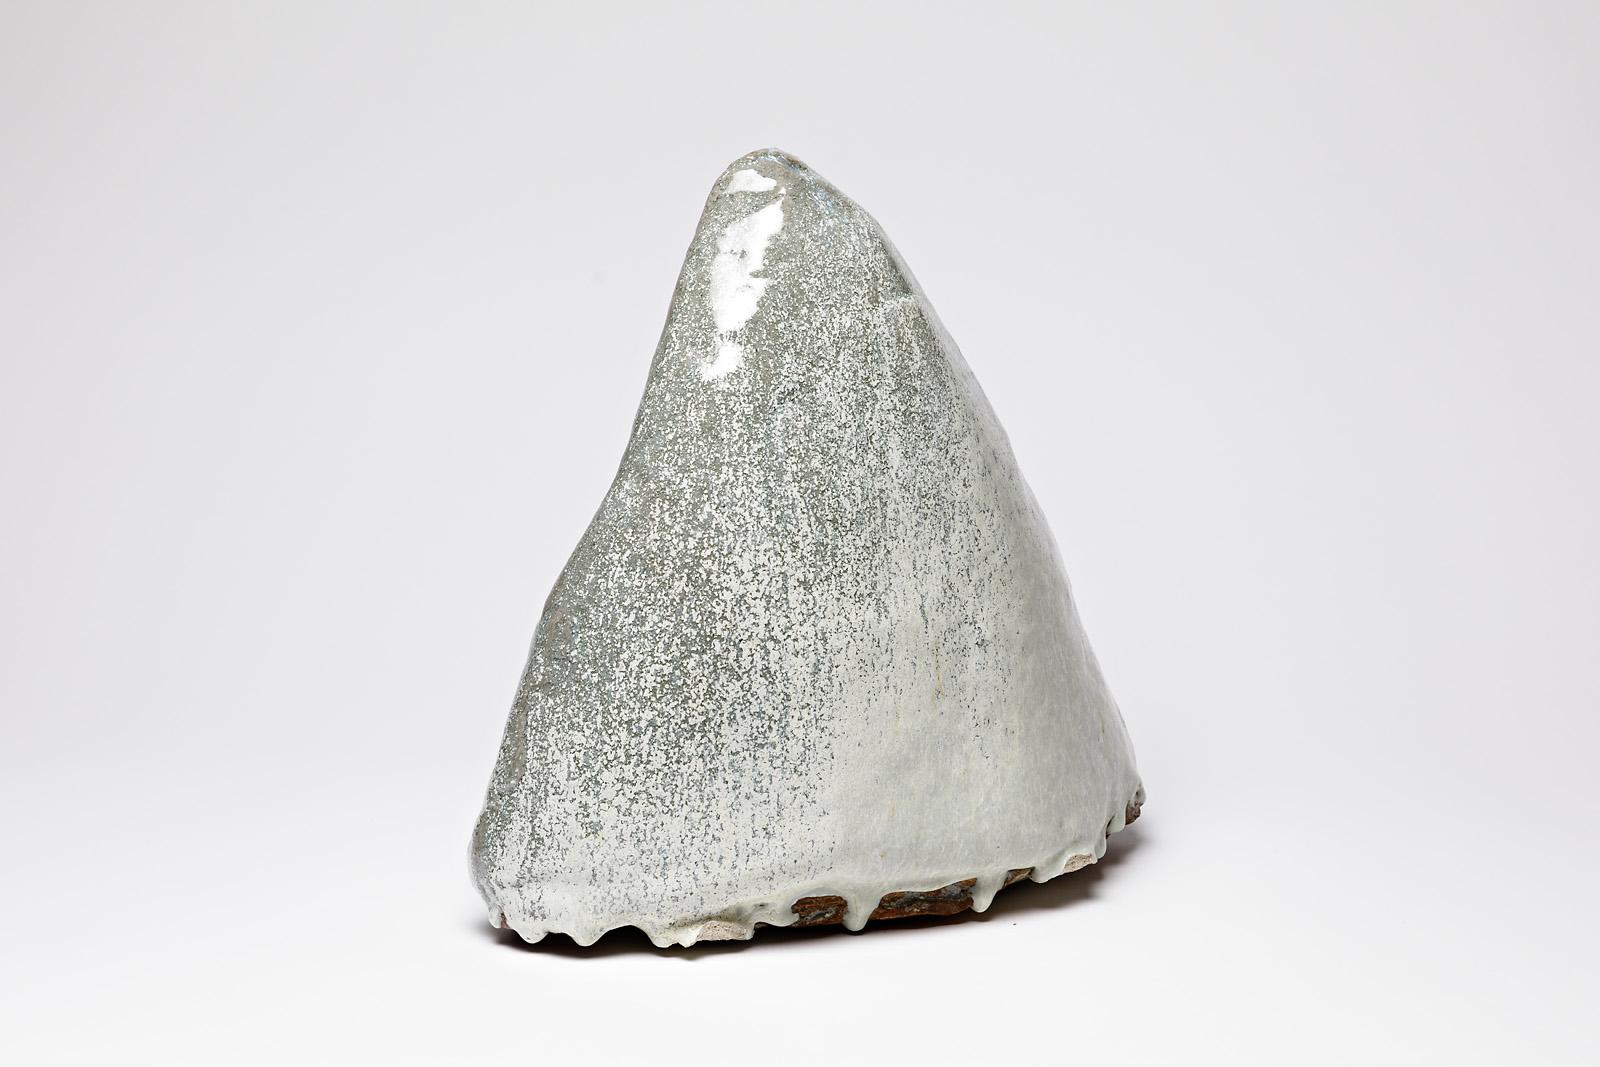 Mid-Century Modern White and Grey Stoneware Ceramic Sculpture by Bernard Dejonghe Contemporary Art For Sale